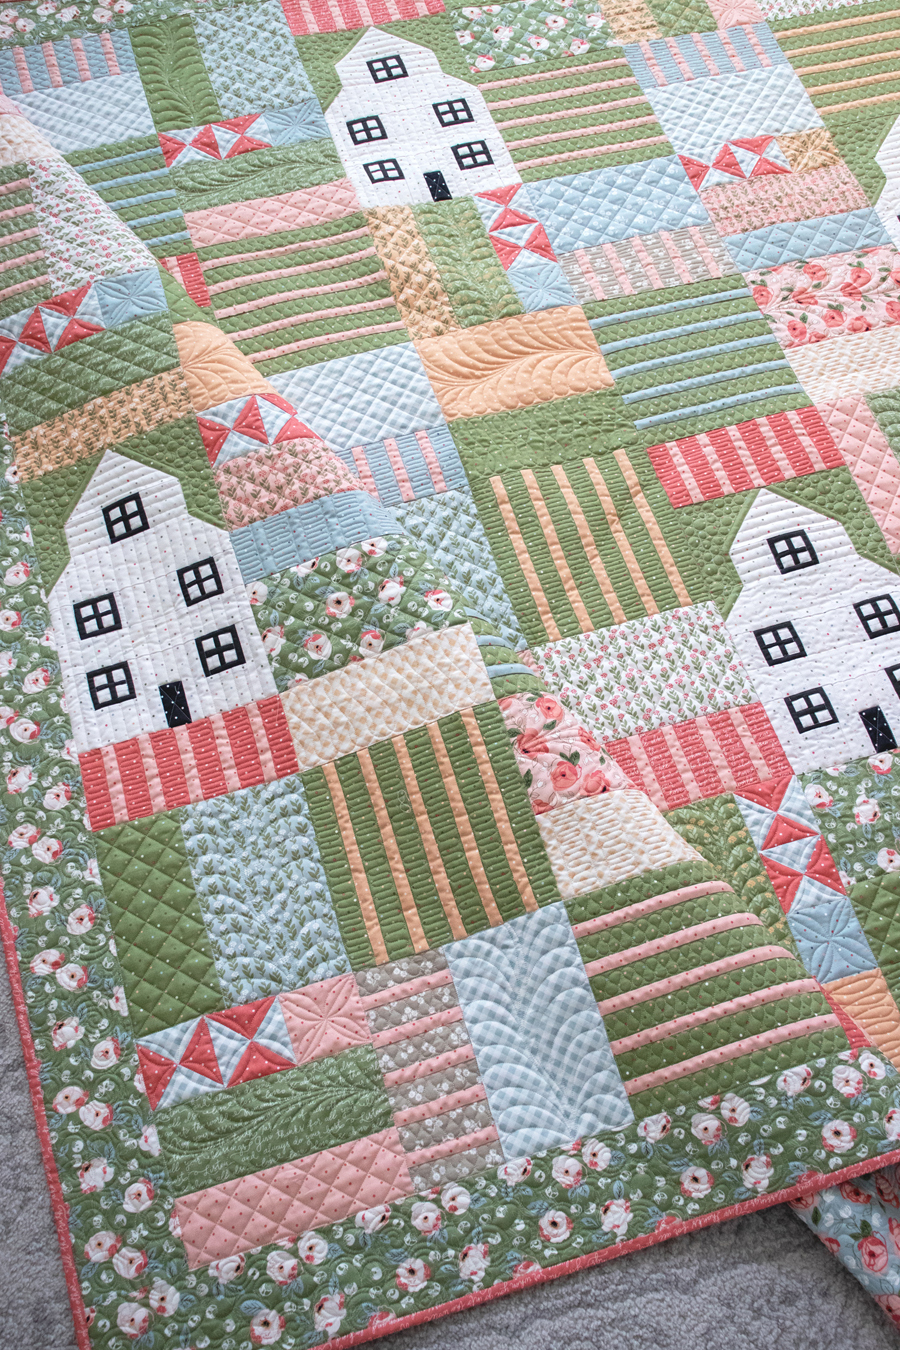 Pure Country farmland quilt by Vanessa Goertzen of Lella Boutique. Fabric is Country Rose by Lella Boutique for Moda Fabrics.